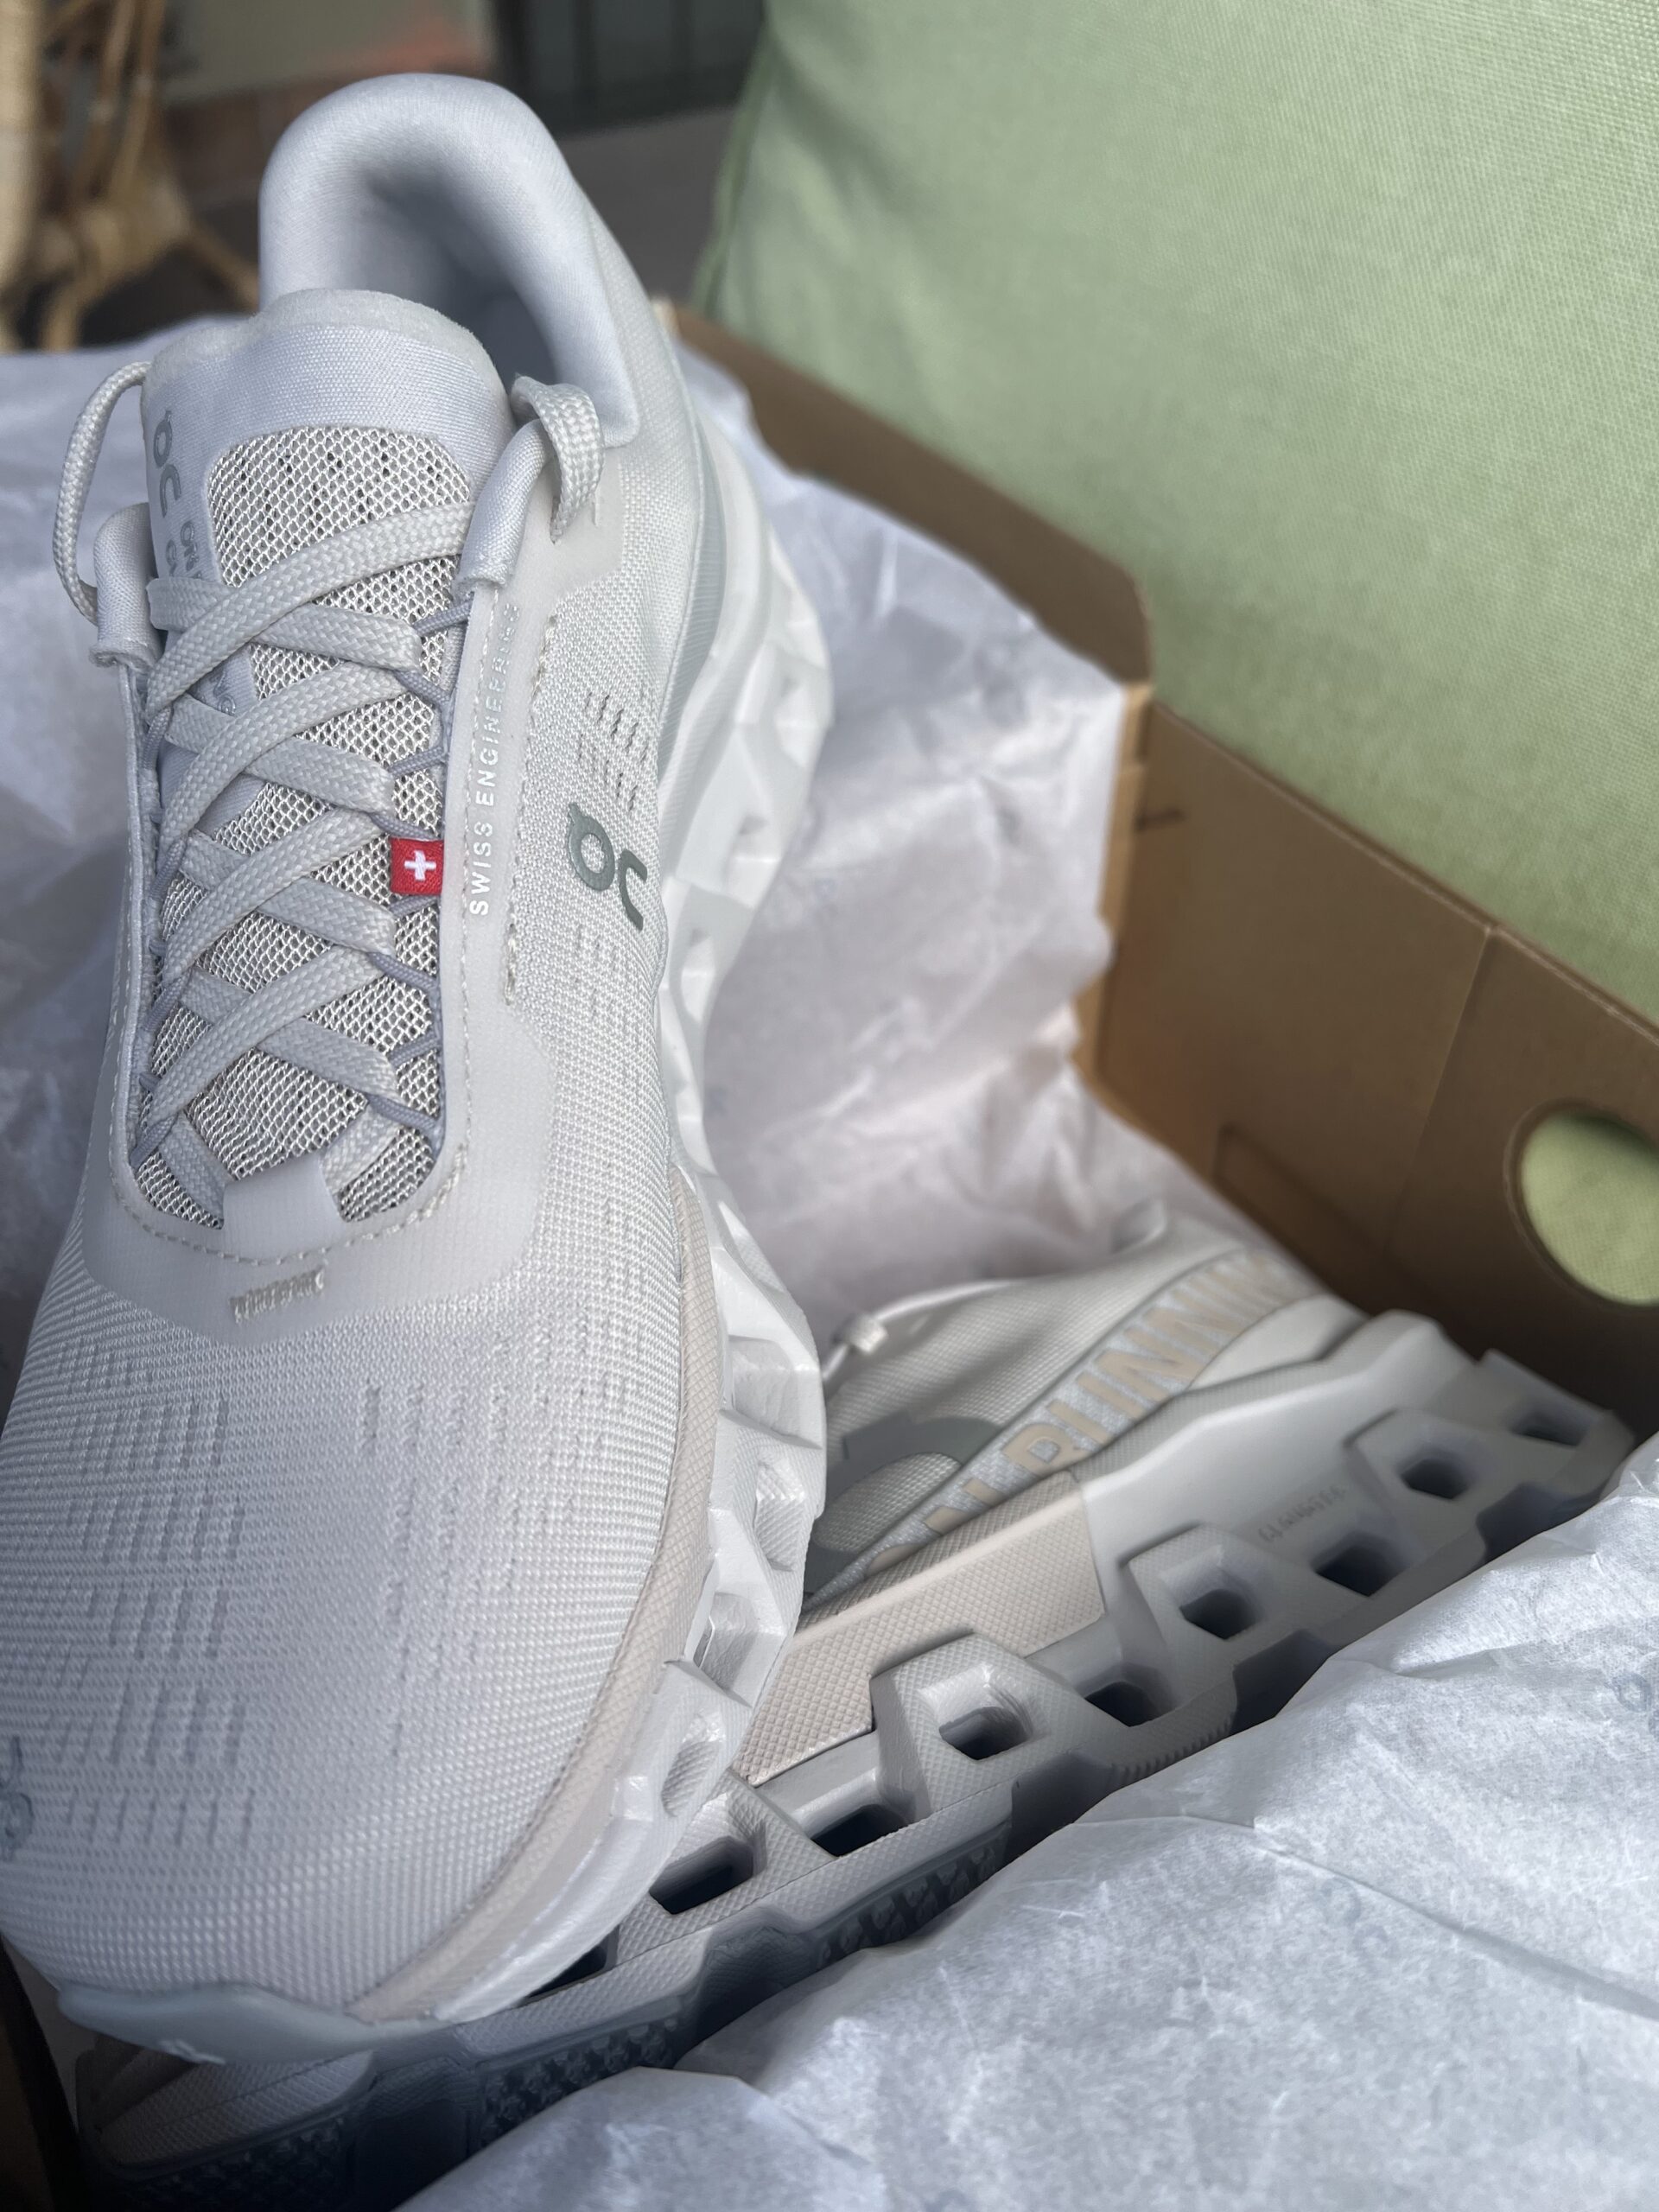 A new white running shoe with distinctive thick soles, displayed on white paper next to a cardboard box and a green pillow.